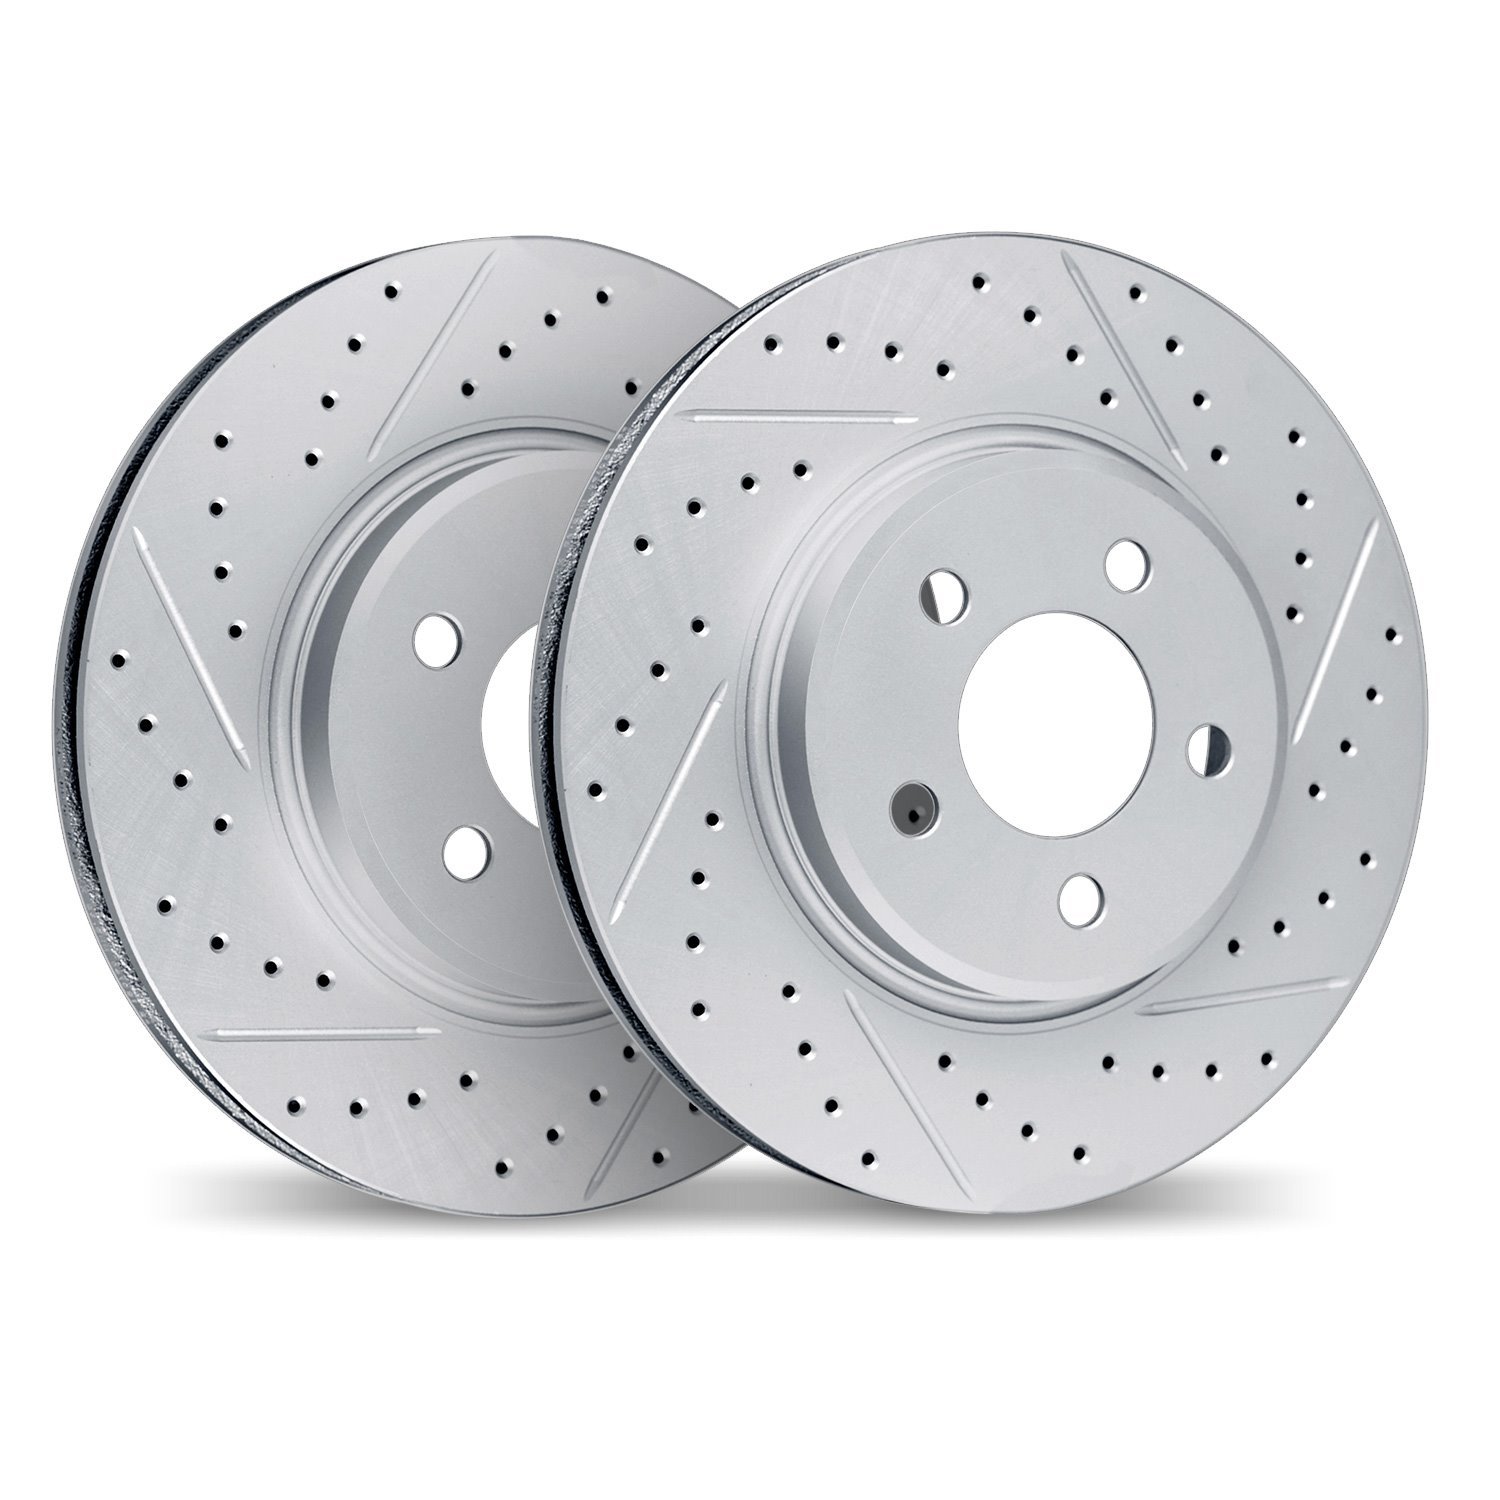 2002-31032 Geoperformance Drilled/Slotted Brake Rotors, 2010-2019 BMW, Position: Front